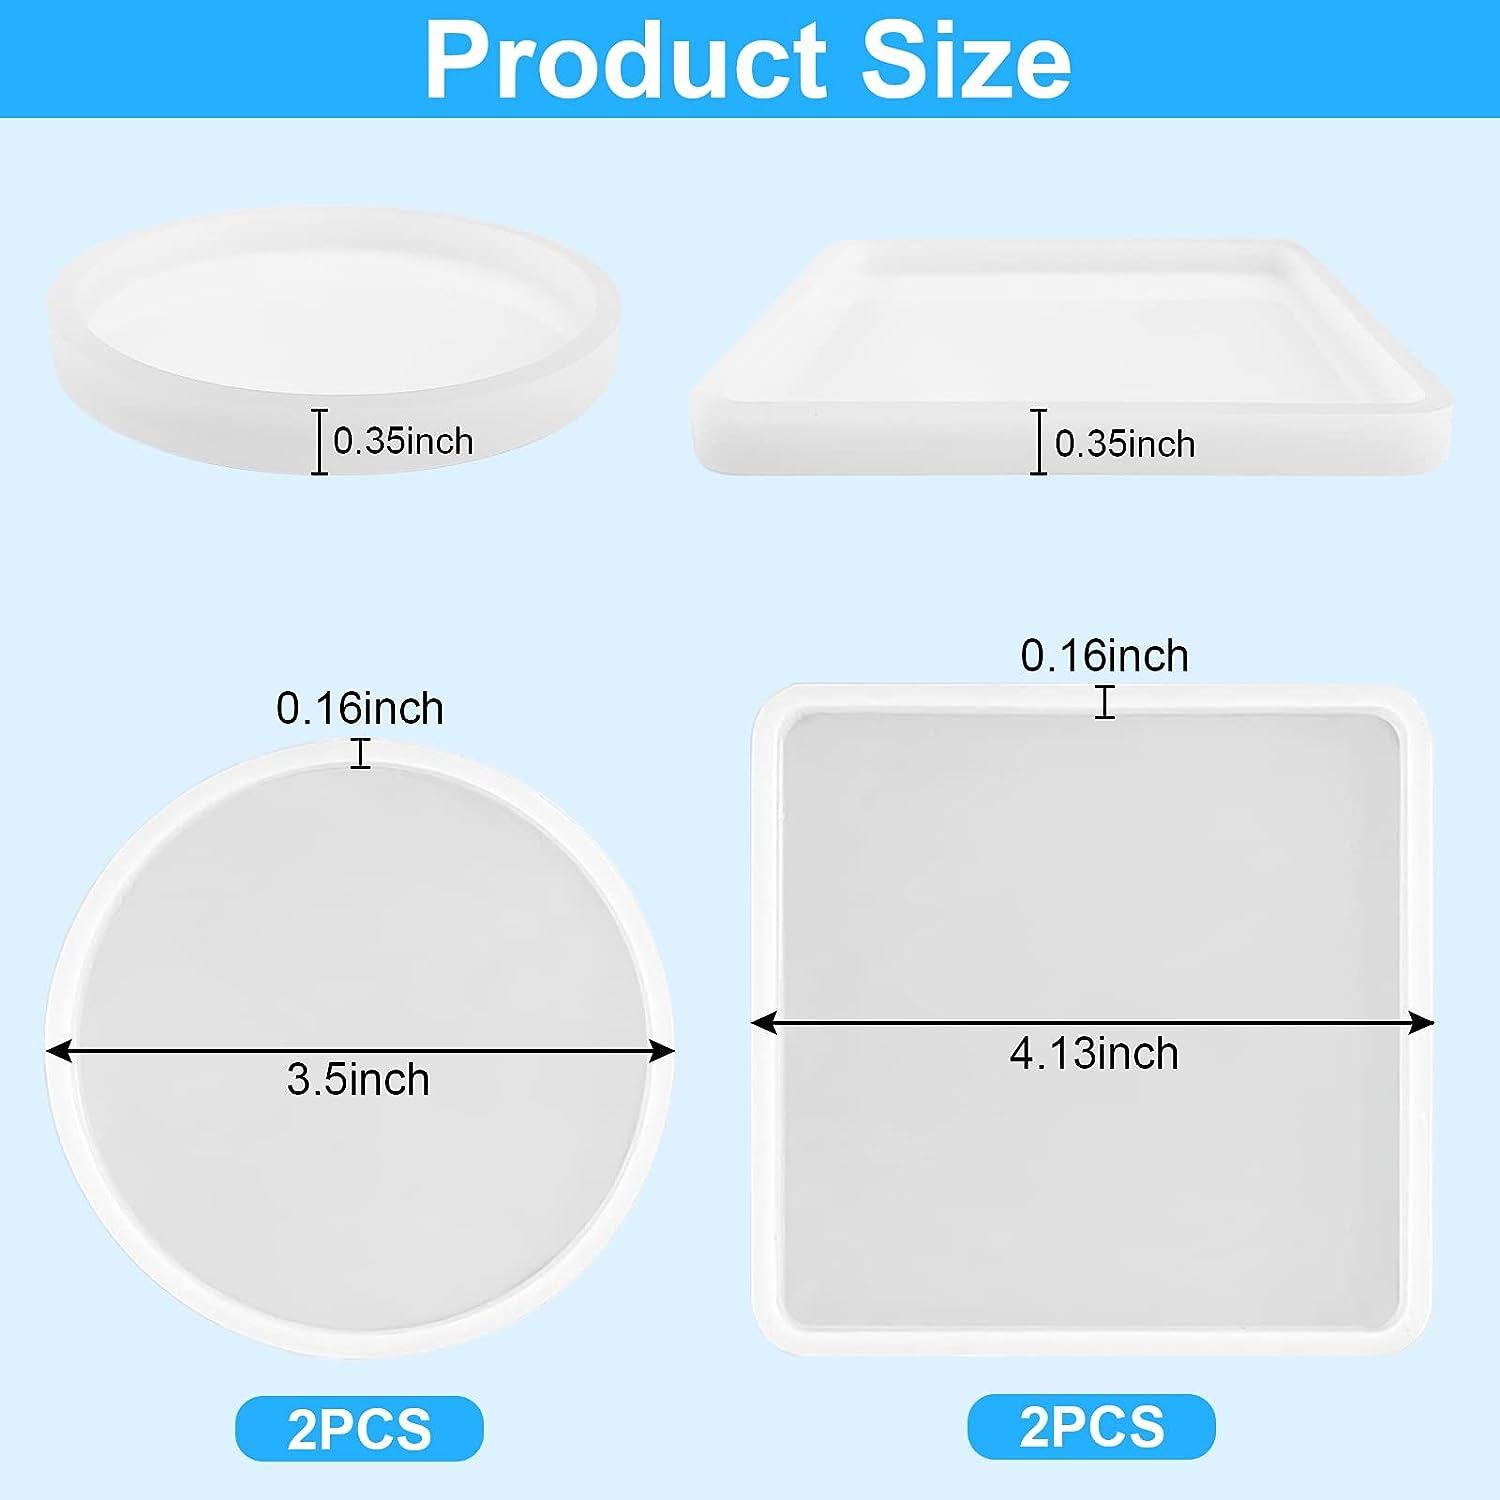 Resin Coaster Silicone Molds, 4 Pcs Coaster Molds for Resin Casting